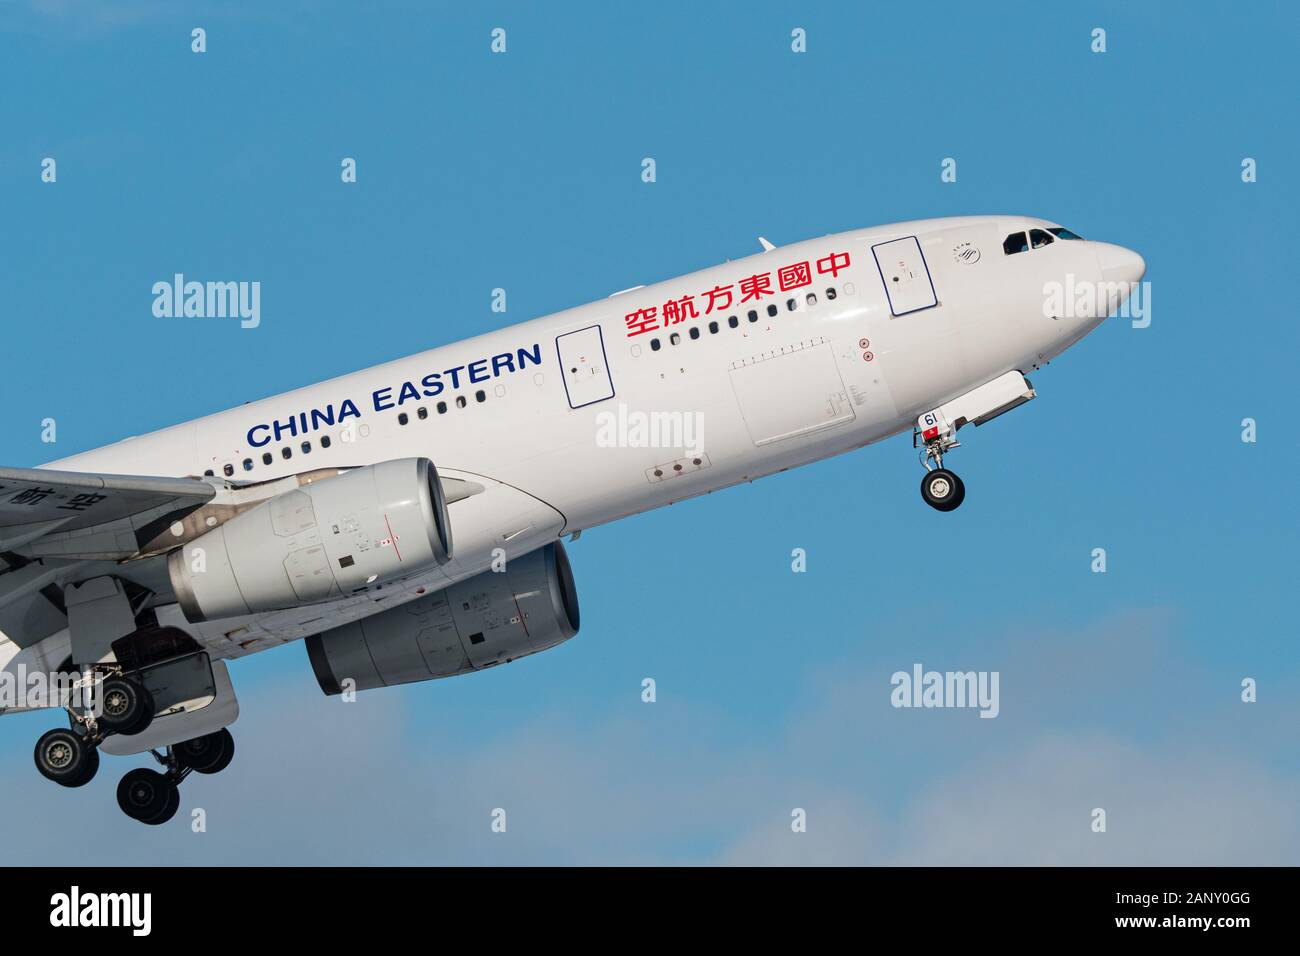 China Eastern Airlines plane Airbus A330 (A330-200) wide-body jet airliner airborne after take-off Stock Photo